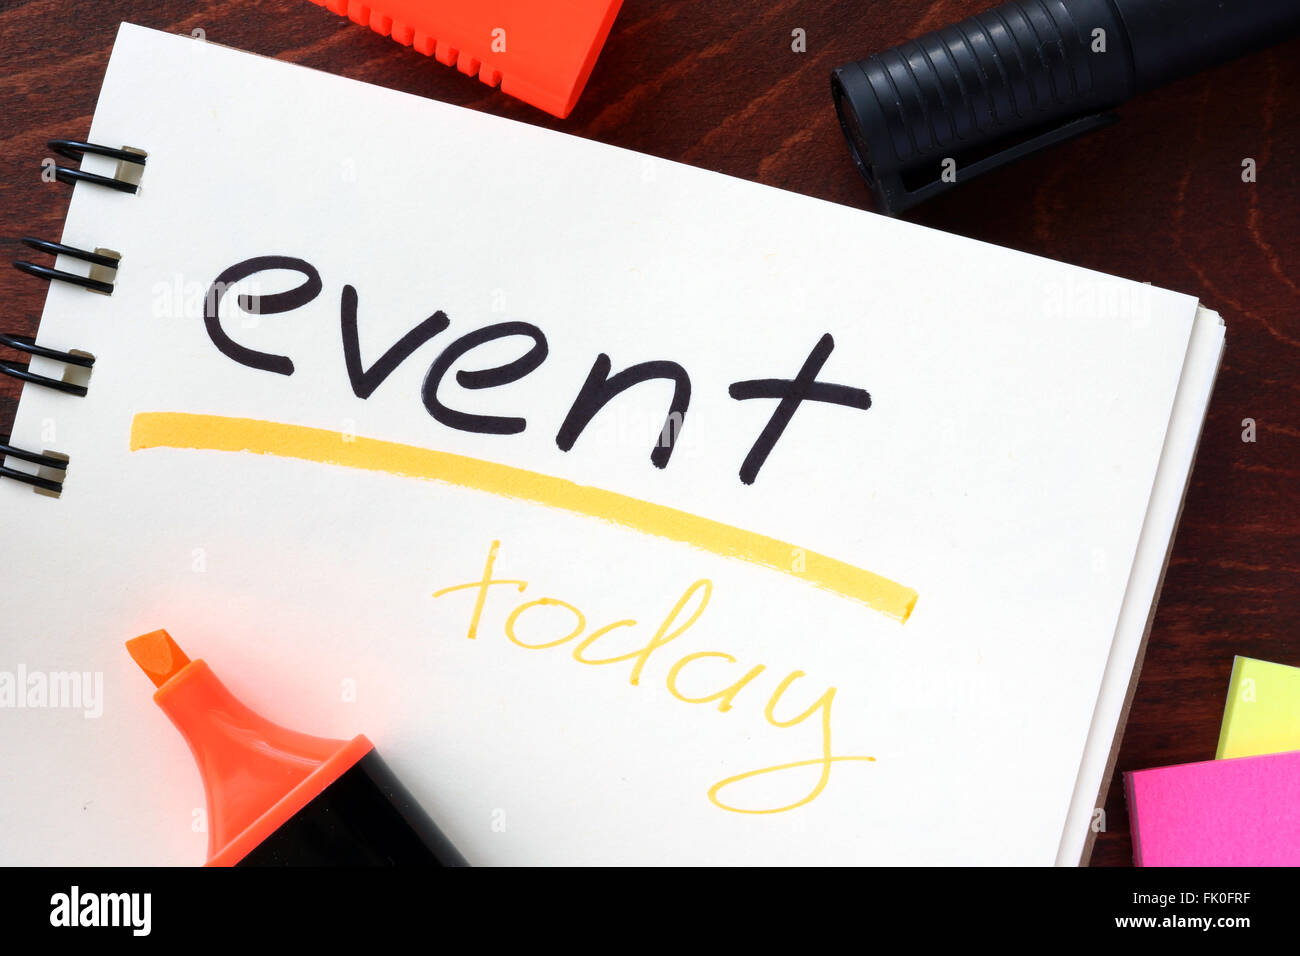 Events concept  written in a notebook on a wooden table. Stock Photo